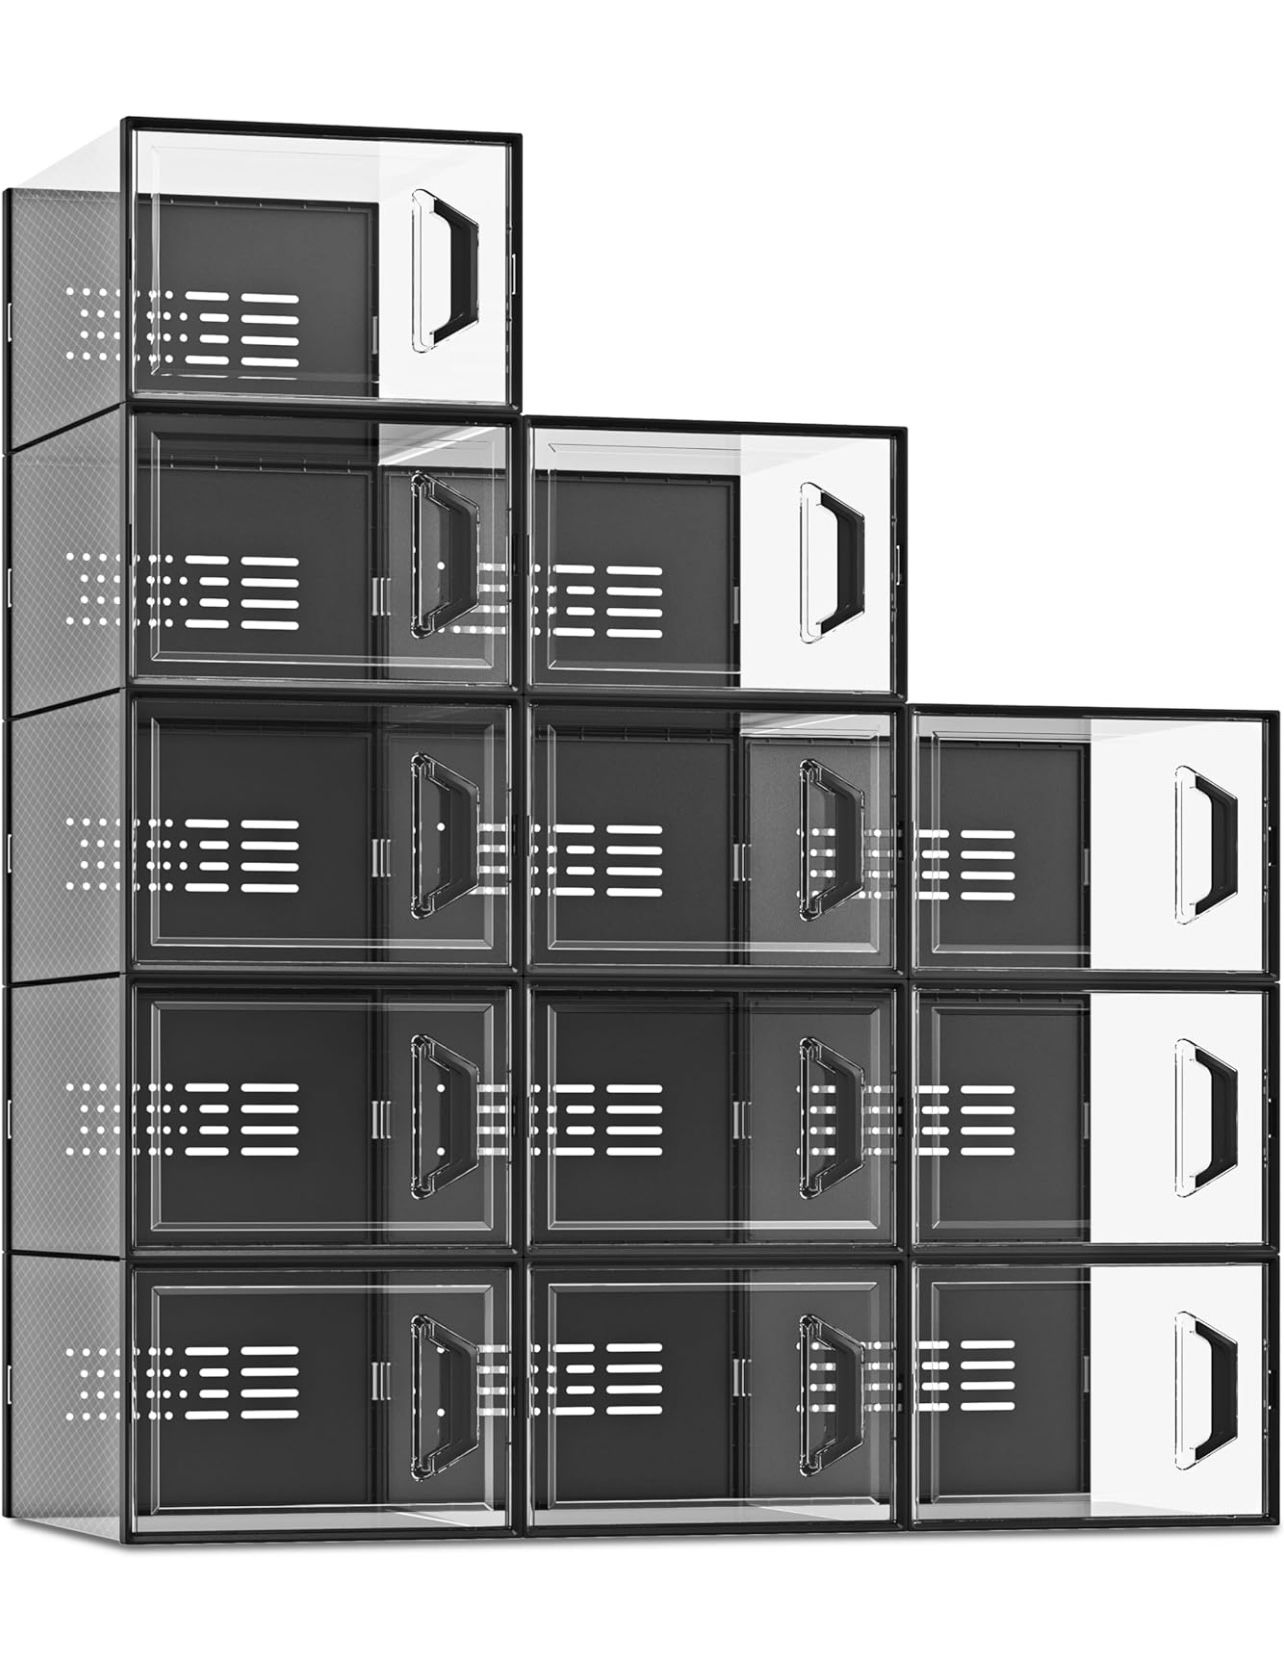 12 Pack Shoe Storage Box Clear Plastic Stackable Shoe Organizer for Closet - Fits Size 11